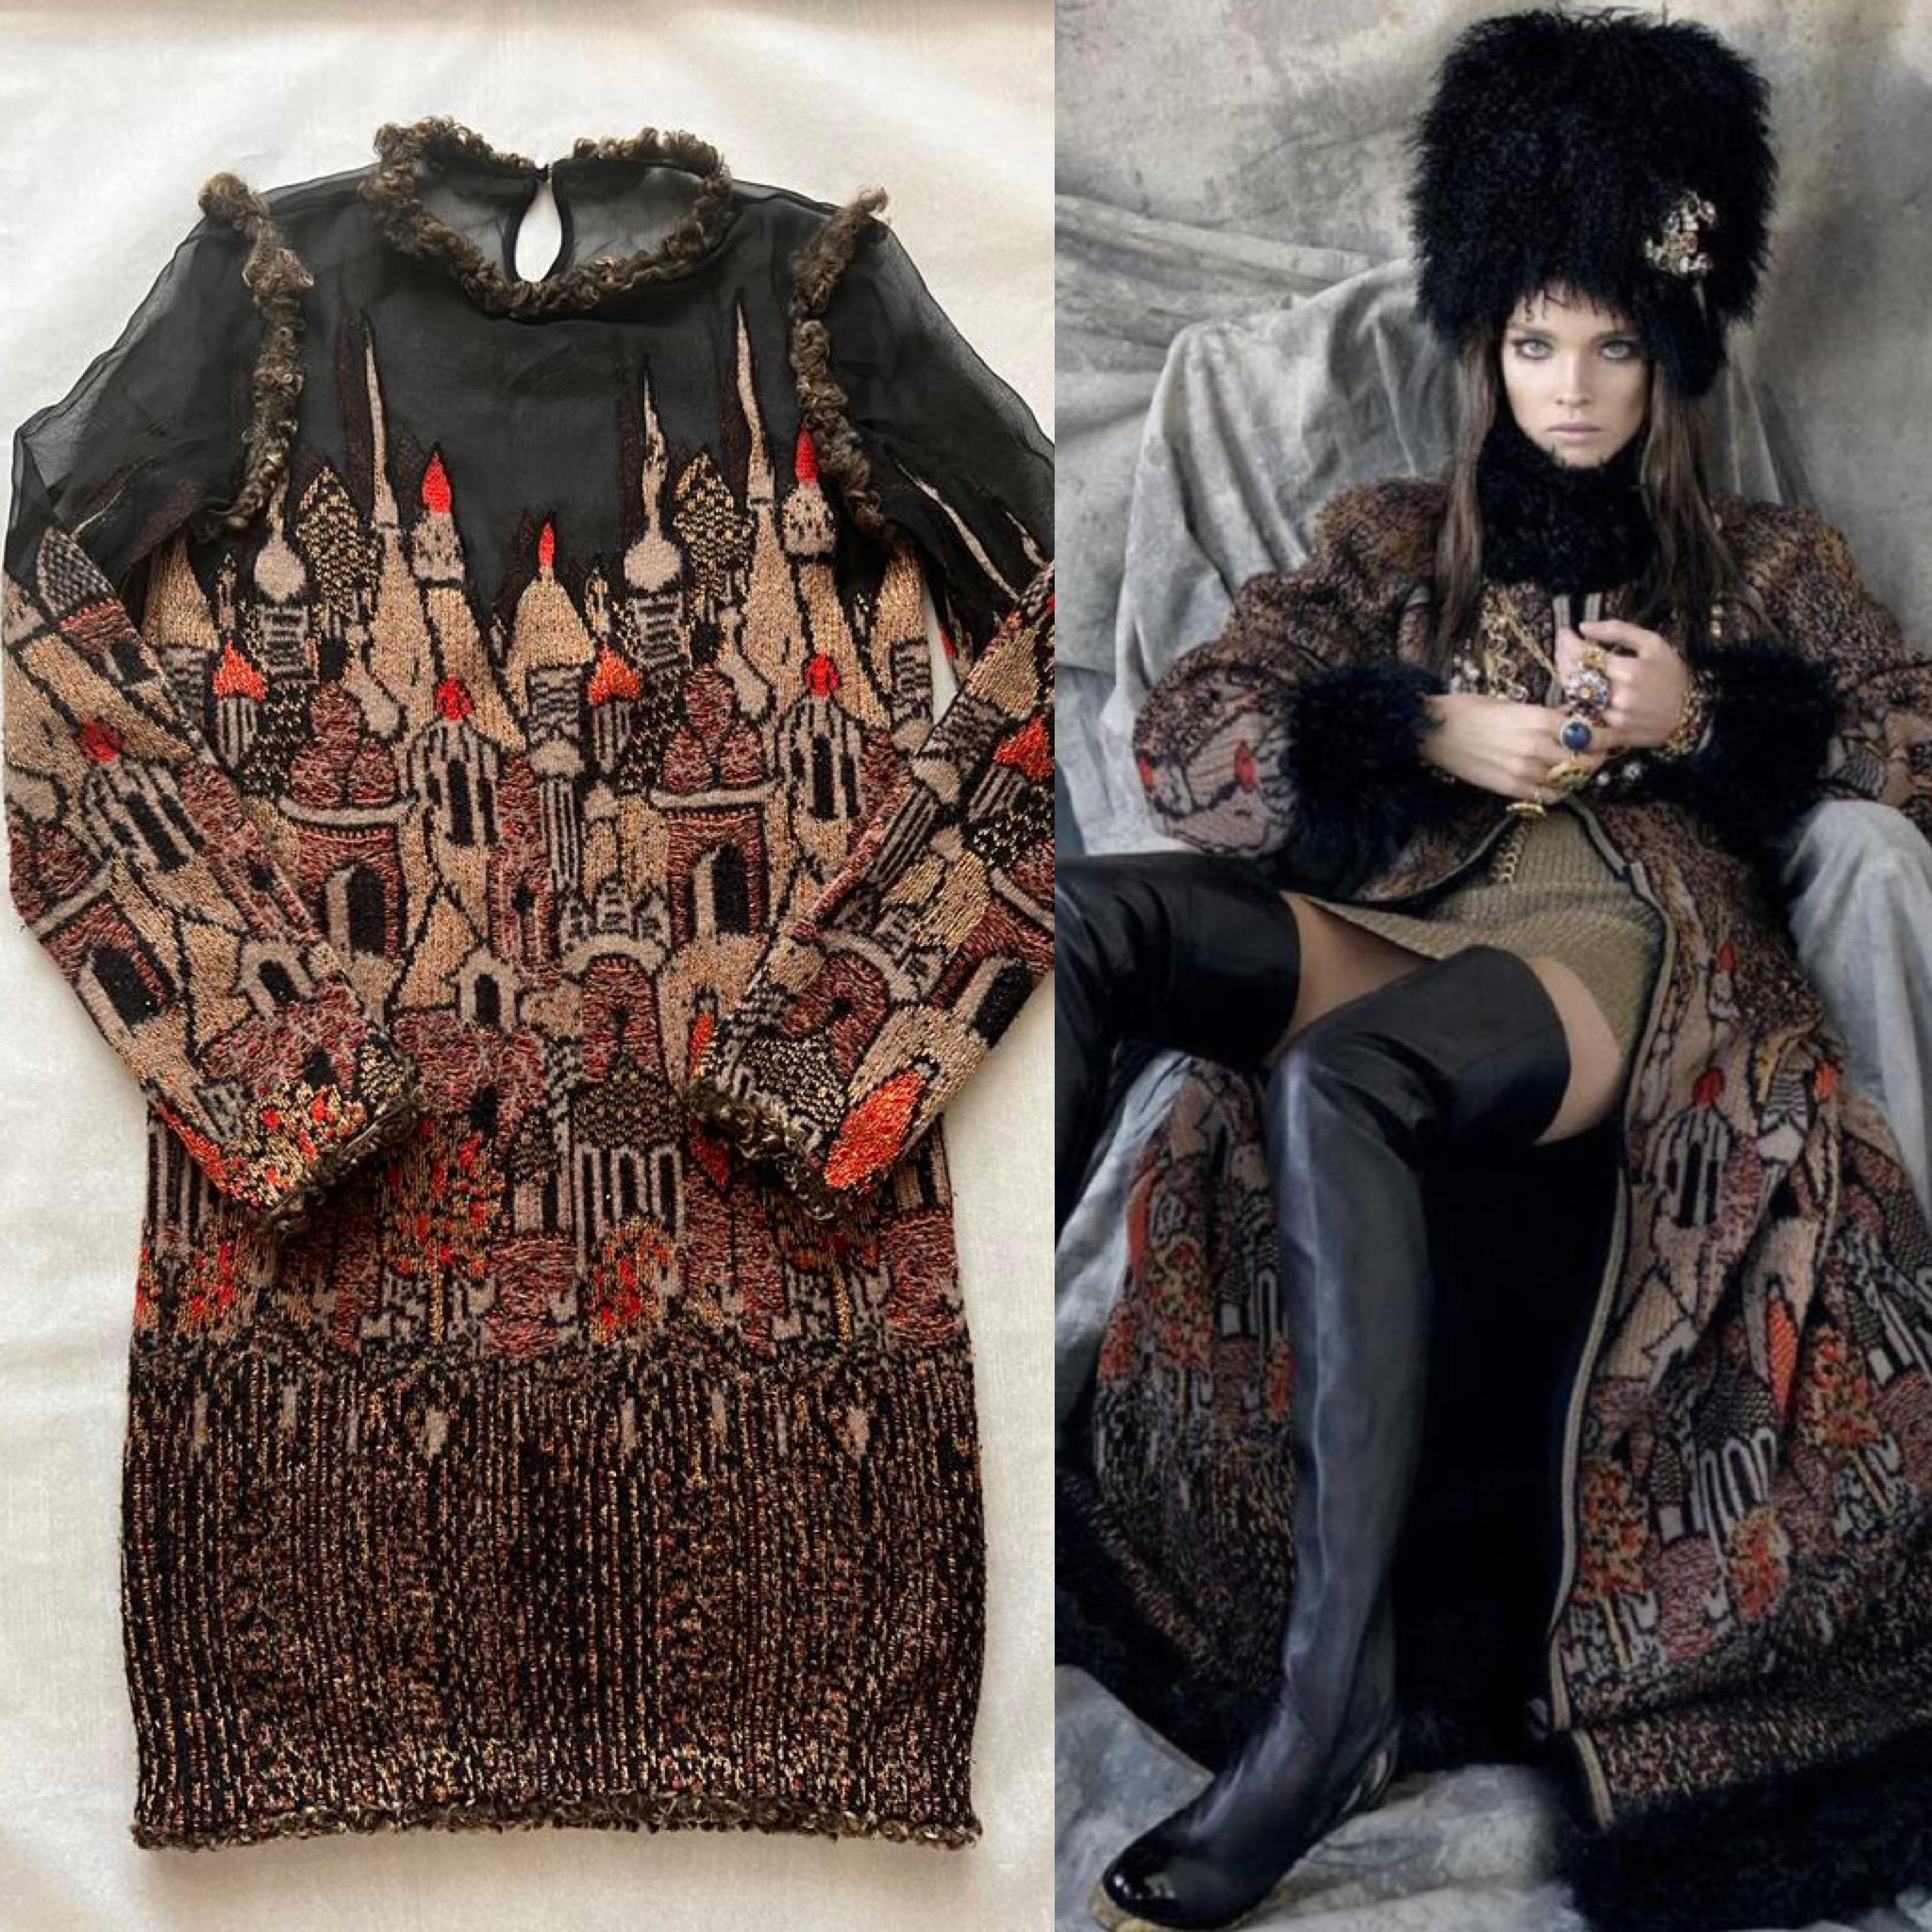 New stunning Chanel dress from Runway of Metiers d'Art Collection 2009, as seen on Supermodel Natalia Vodianova.
Retail price was about 6,000$
- CC logo ' matryoshka ' buttons at back
- sheer black details
Size mark 34 FR, may fit also 36 FR. Never